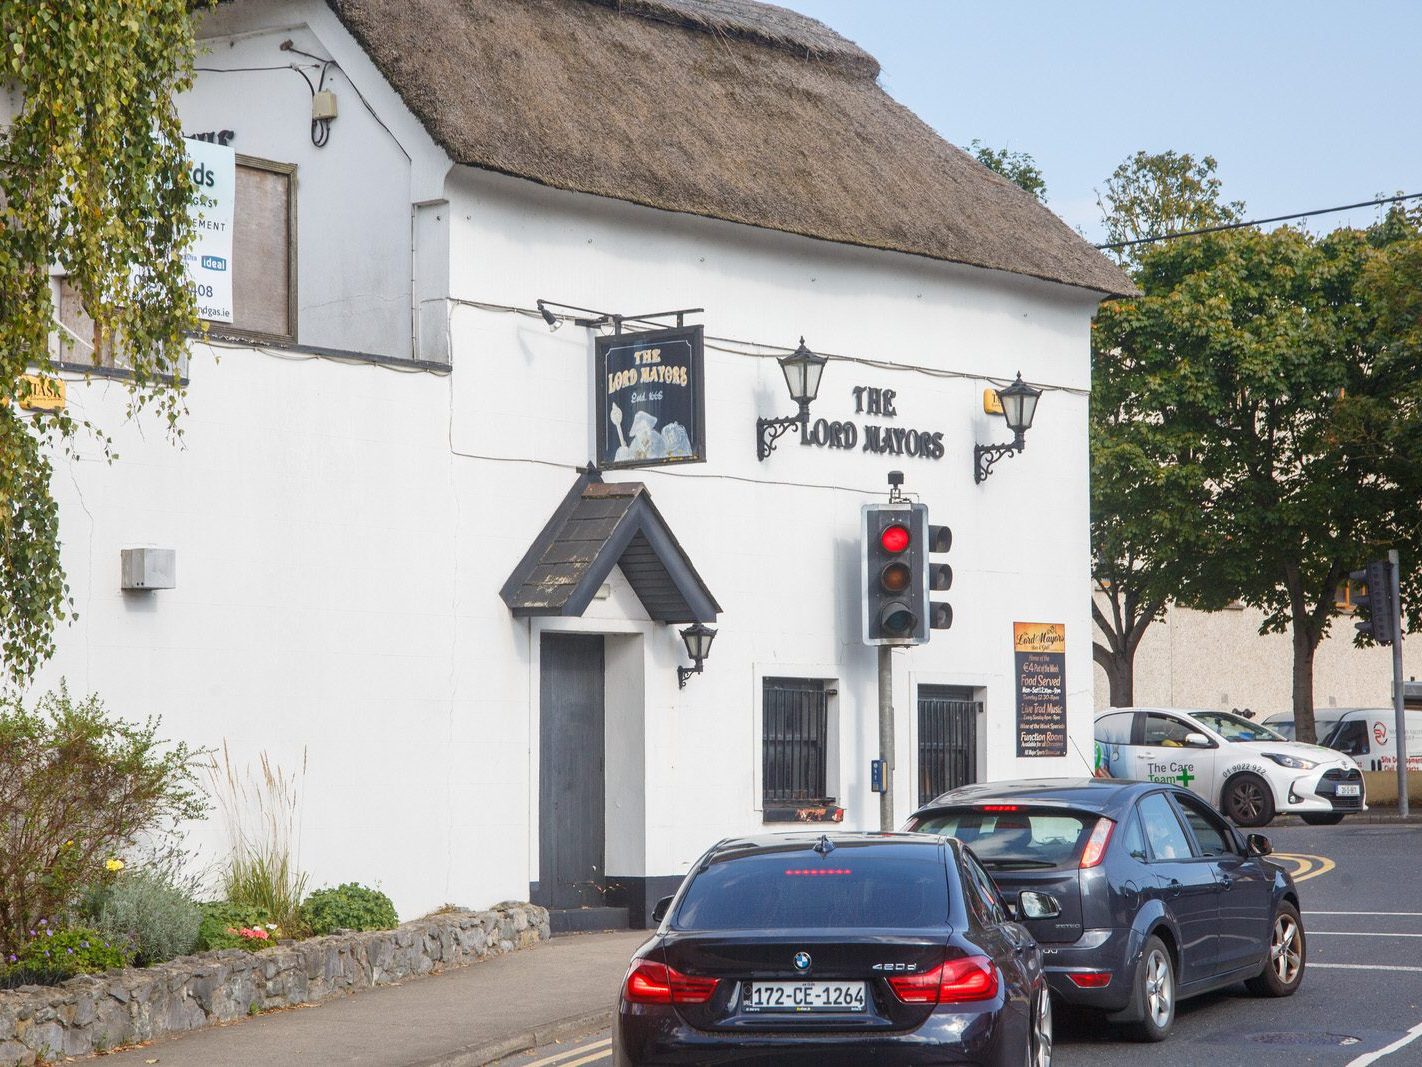 THE LORD MAYOR'S PUB IS TO BE DEMOLISHED [I VISITED SWORDS IN ORDER TO PHOTOGRAPH THIS THATCHED PUB] 004